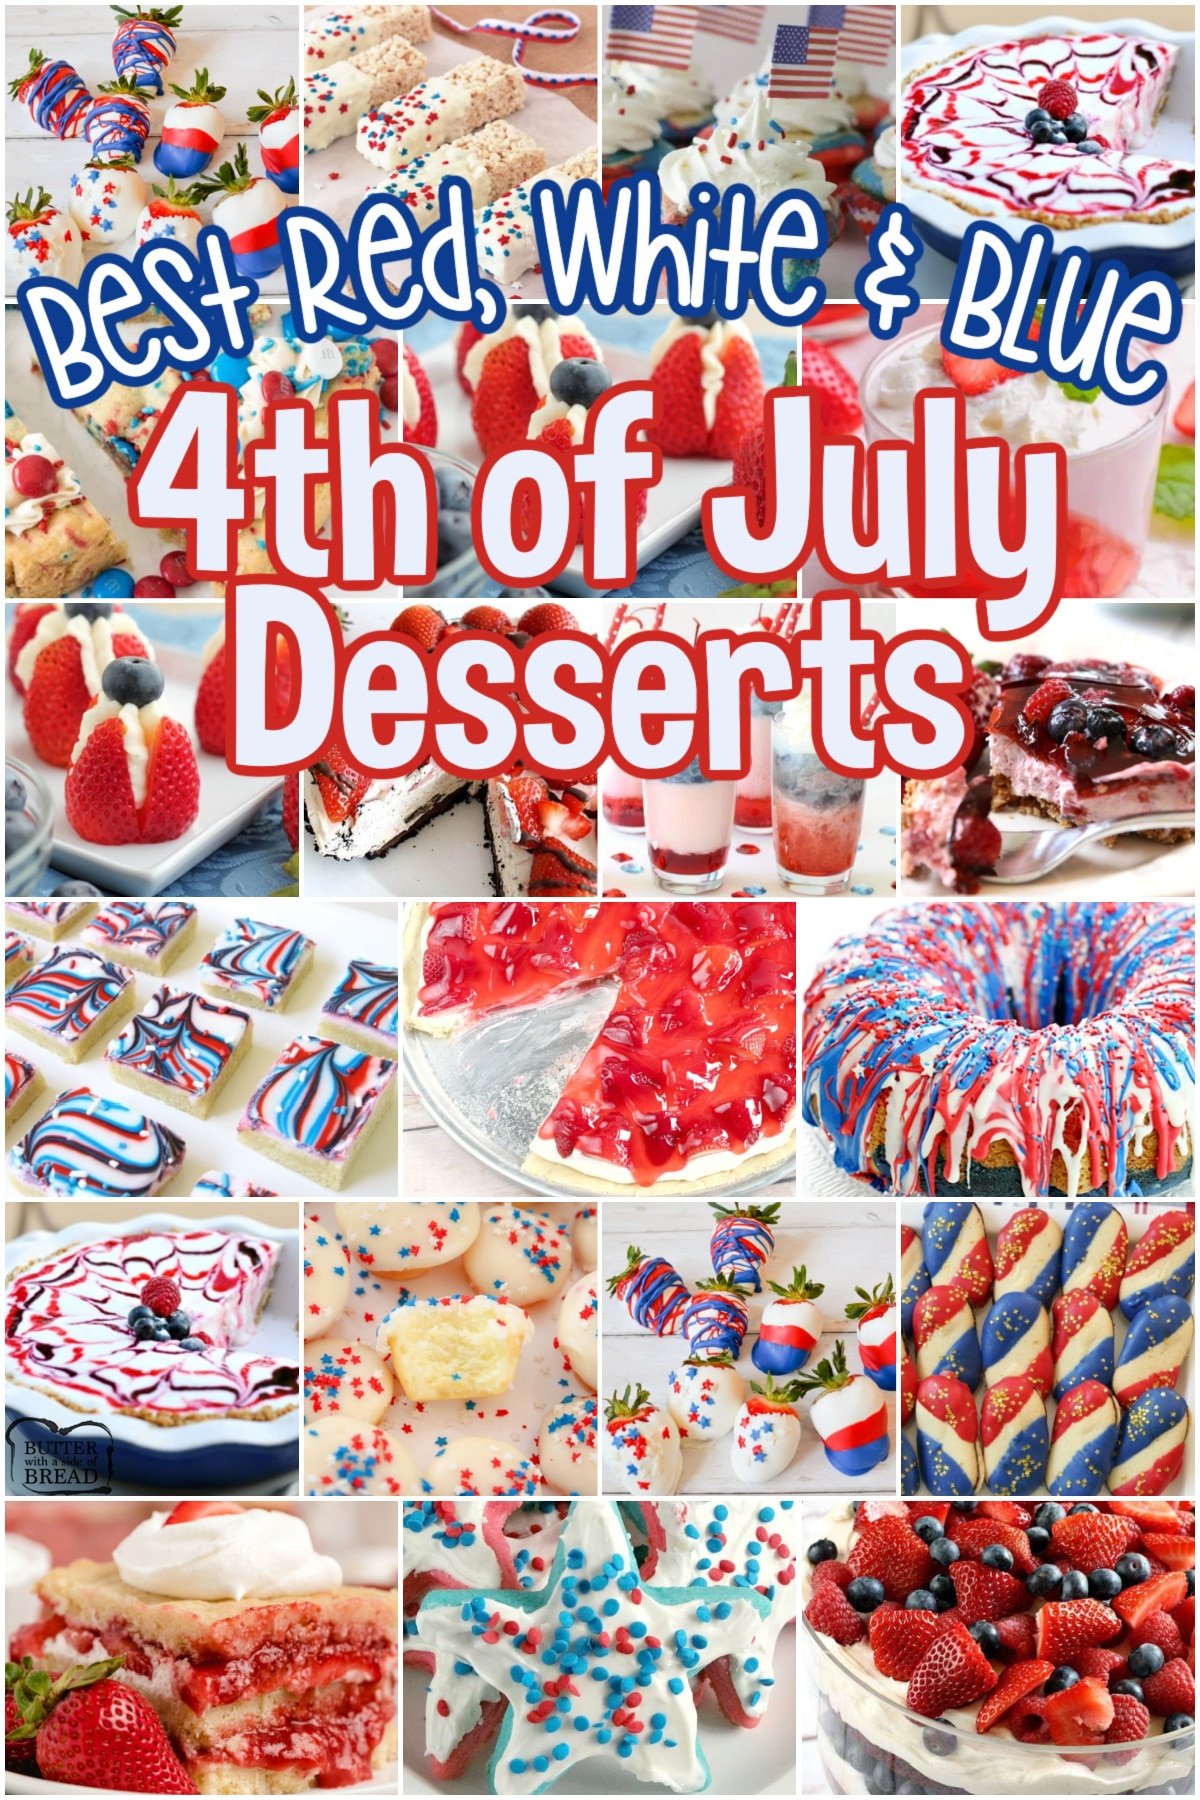 Red White & Blue 4th of July Desserts